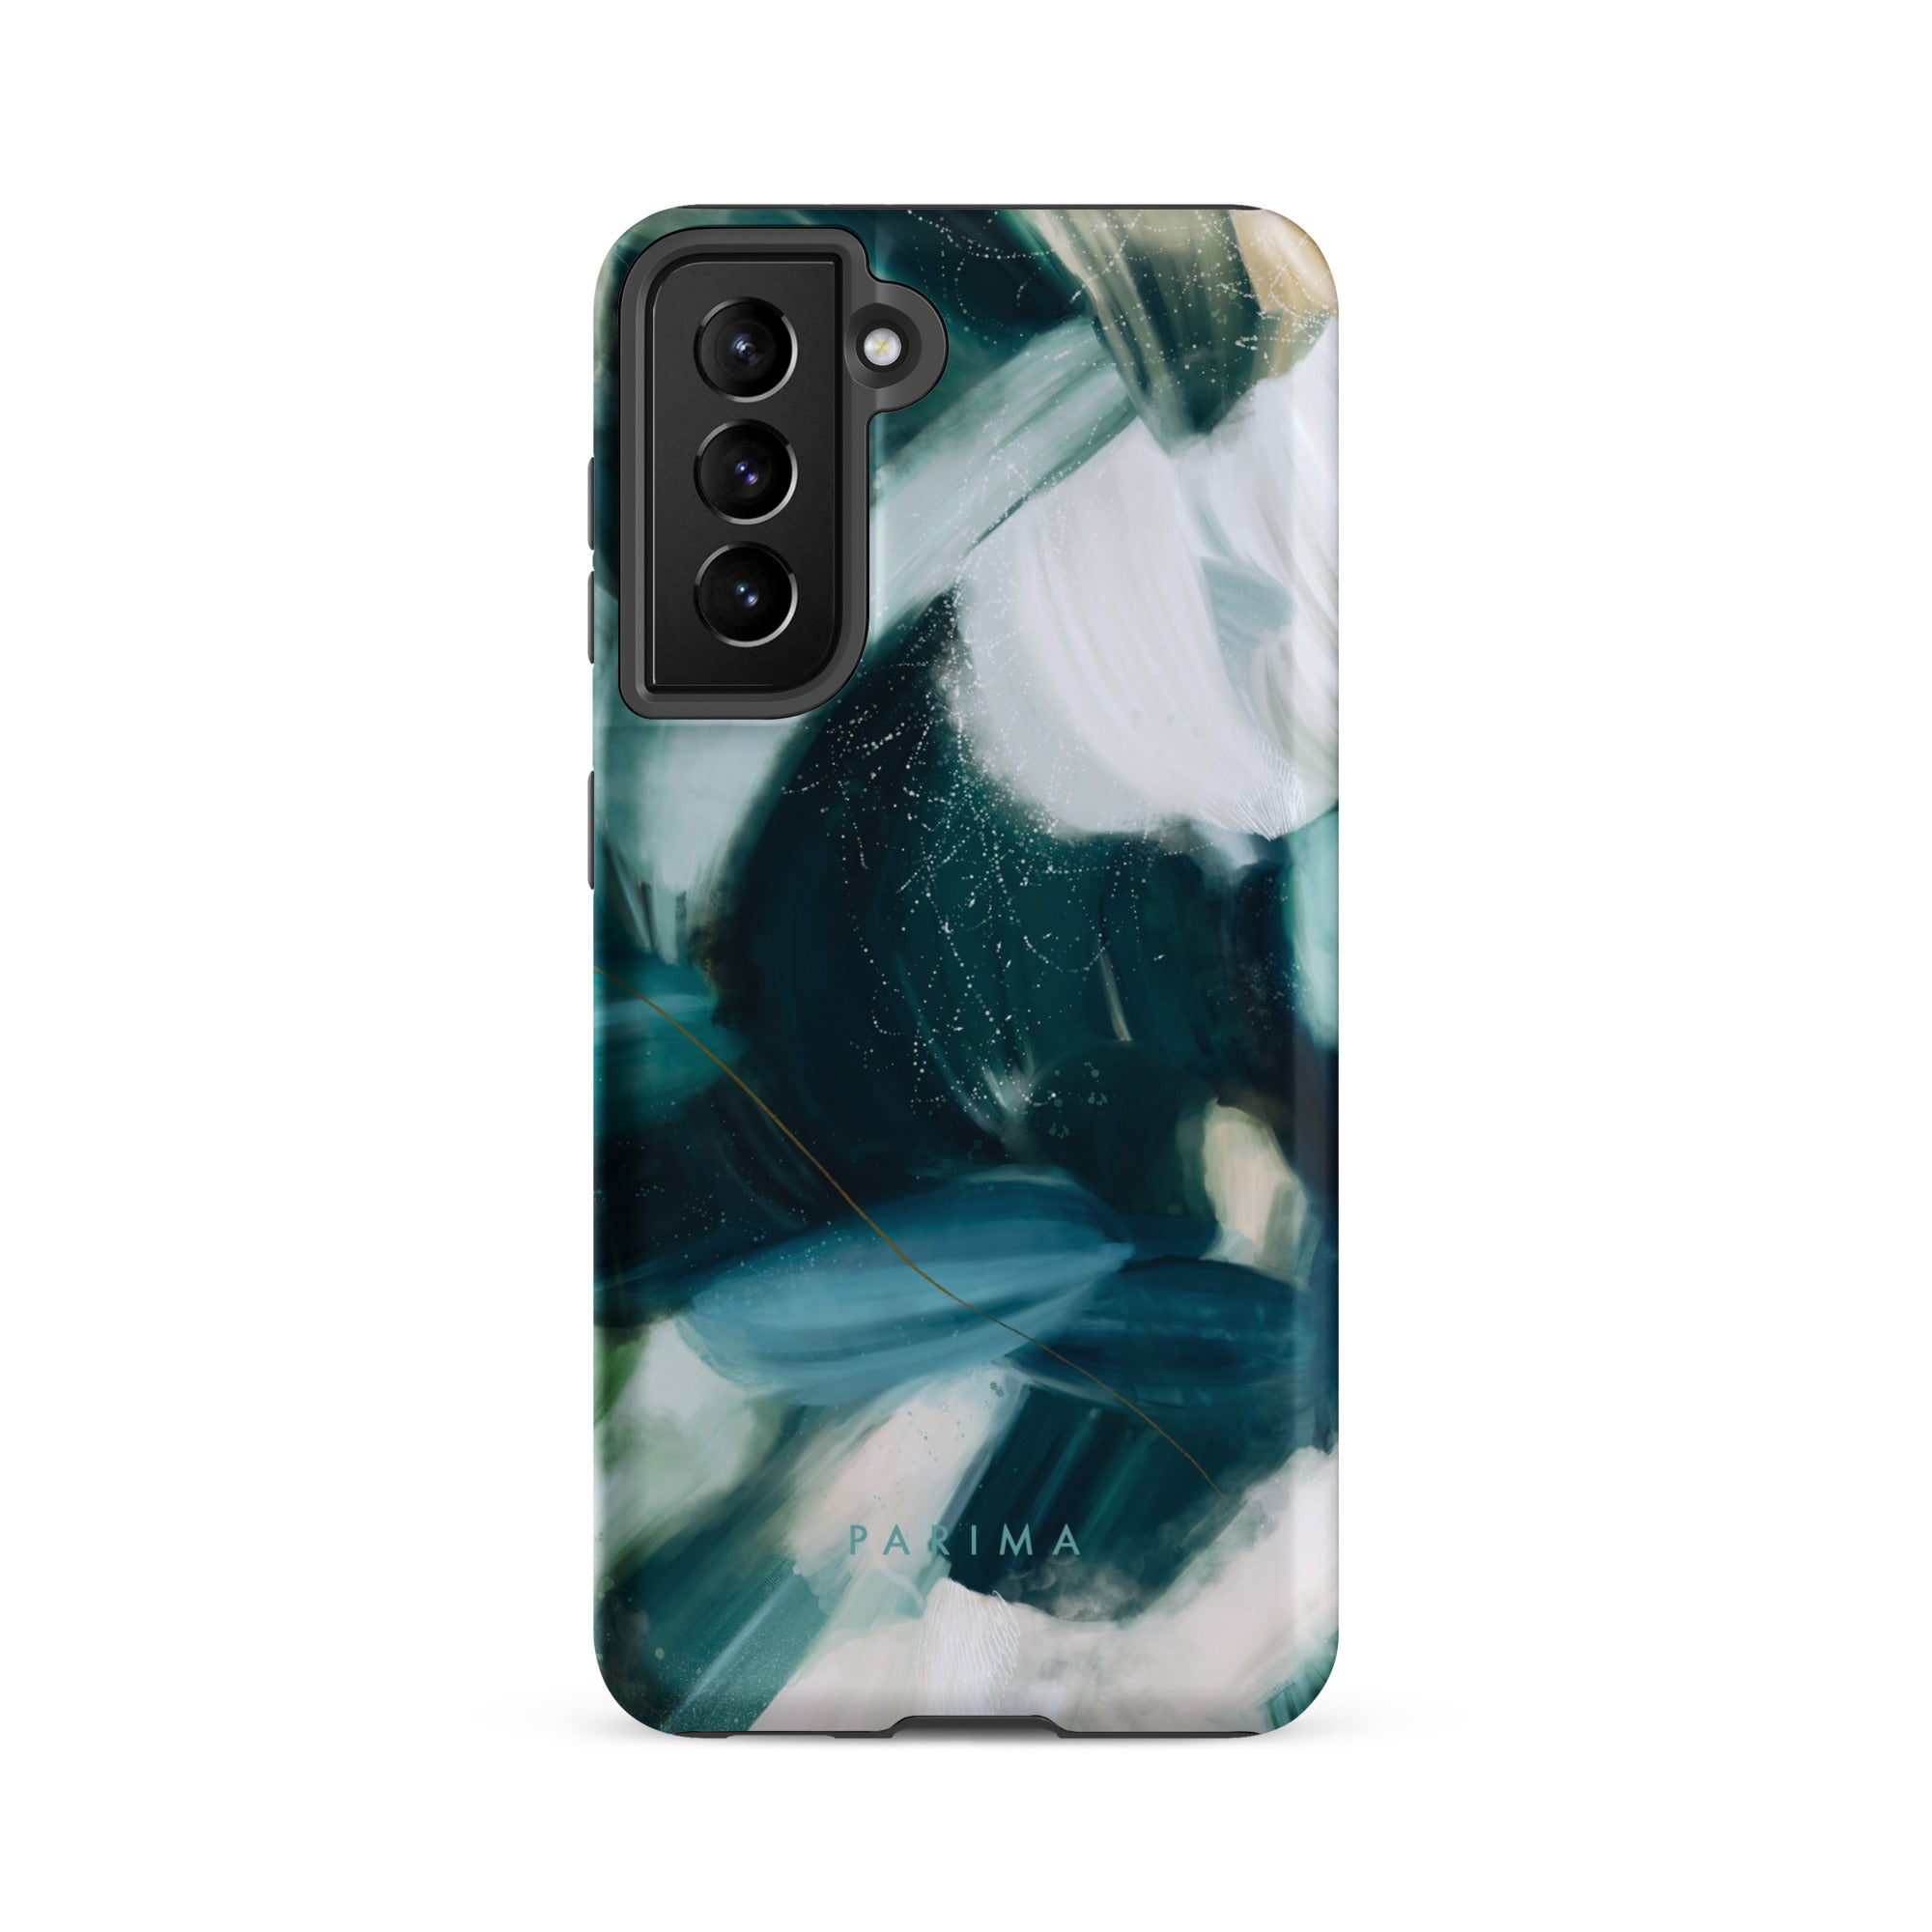 Caspian, blue and teal abstract art on Samsung Galaxy S21 FE tough case by Parima Studio